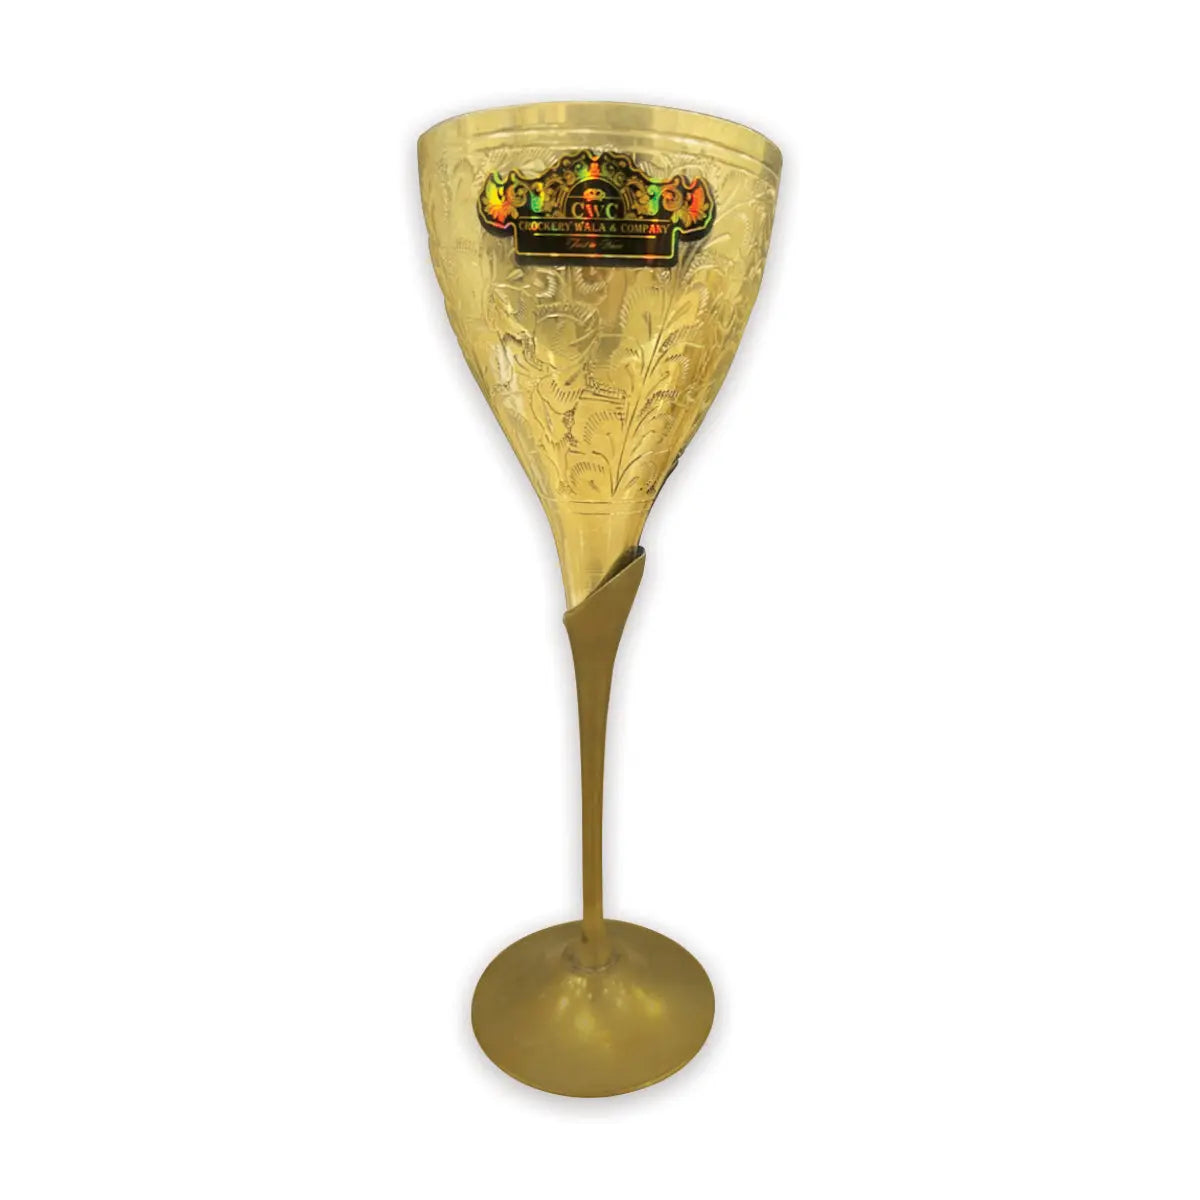 Pure Brass Embossed Goblet Champagne Wine Glass for Parties Drinks - CROCKERY WALA AND COMPANY 